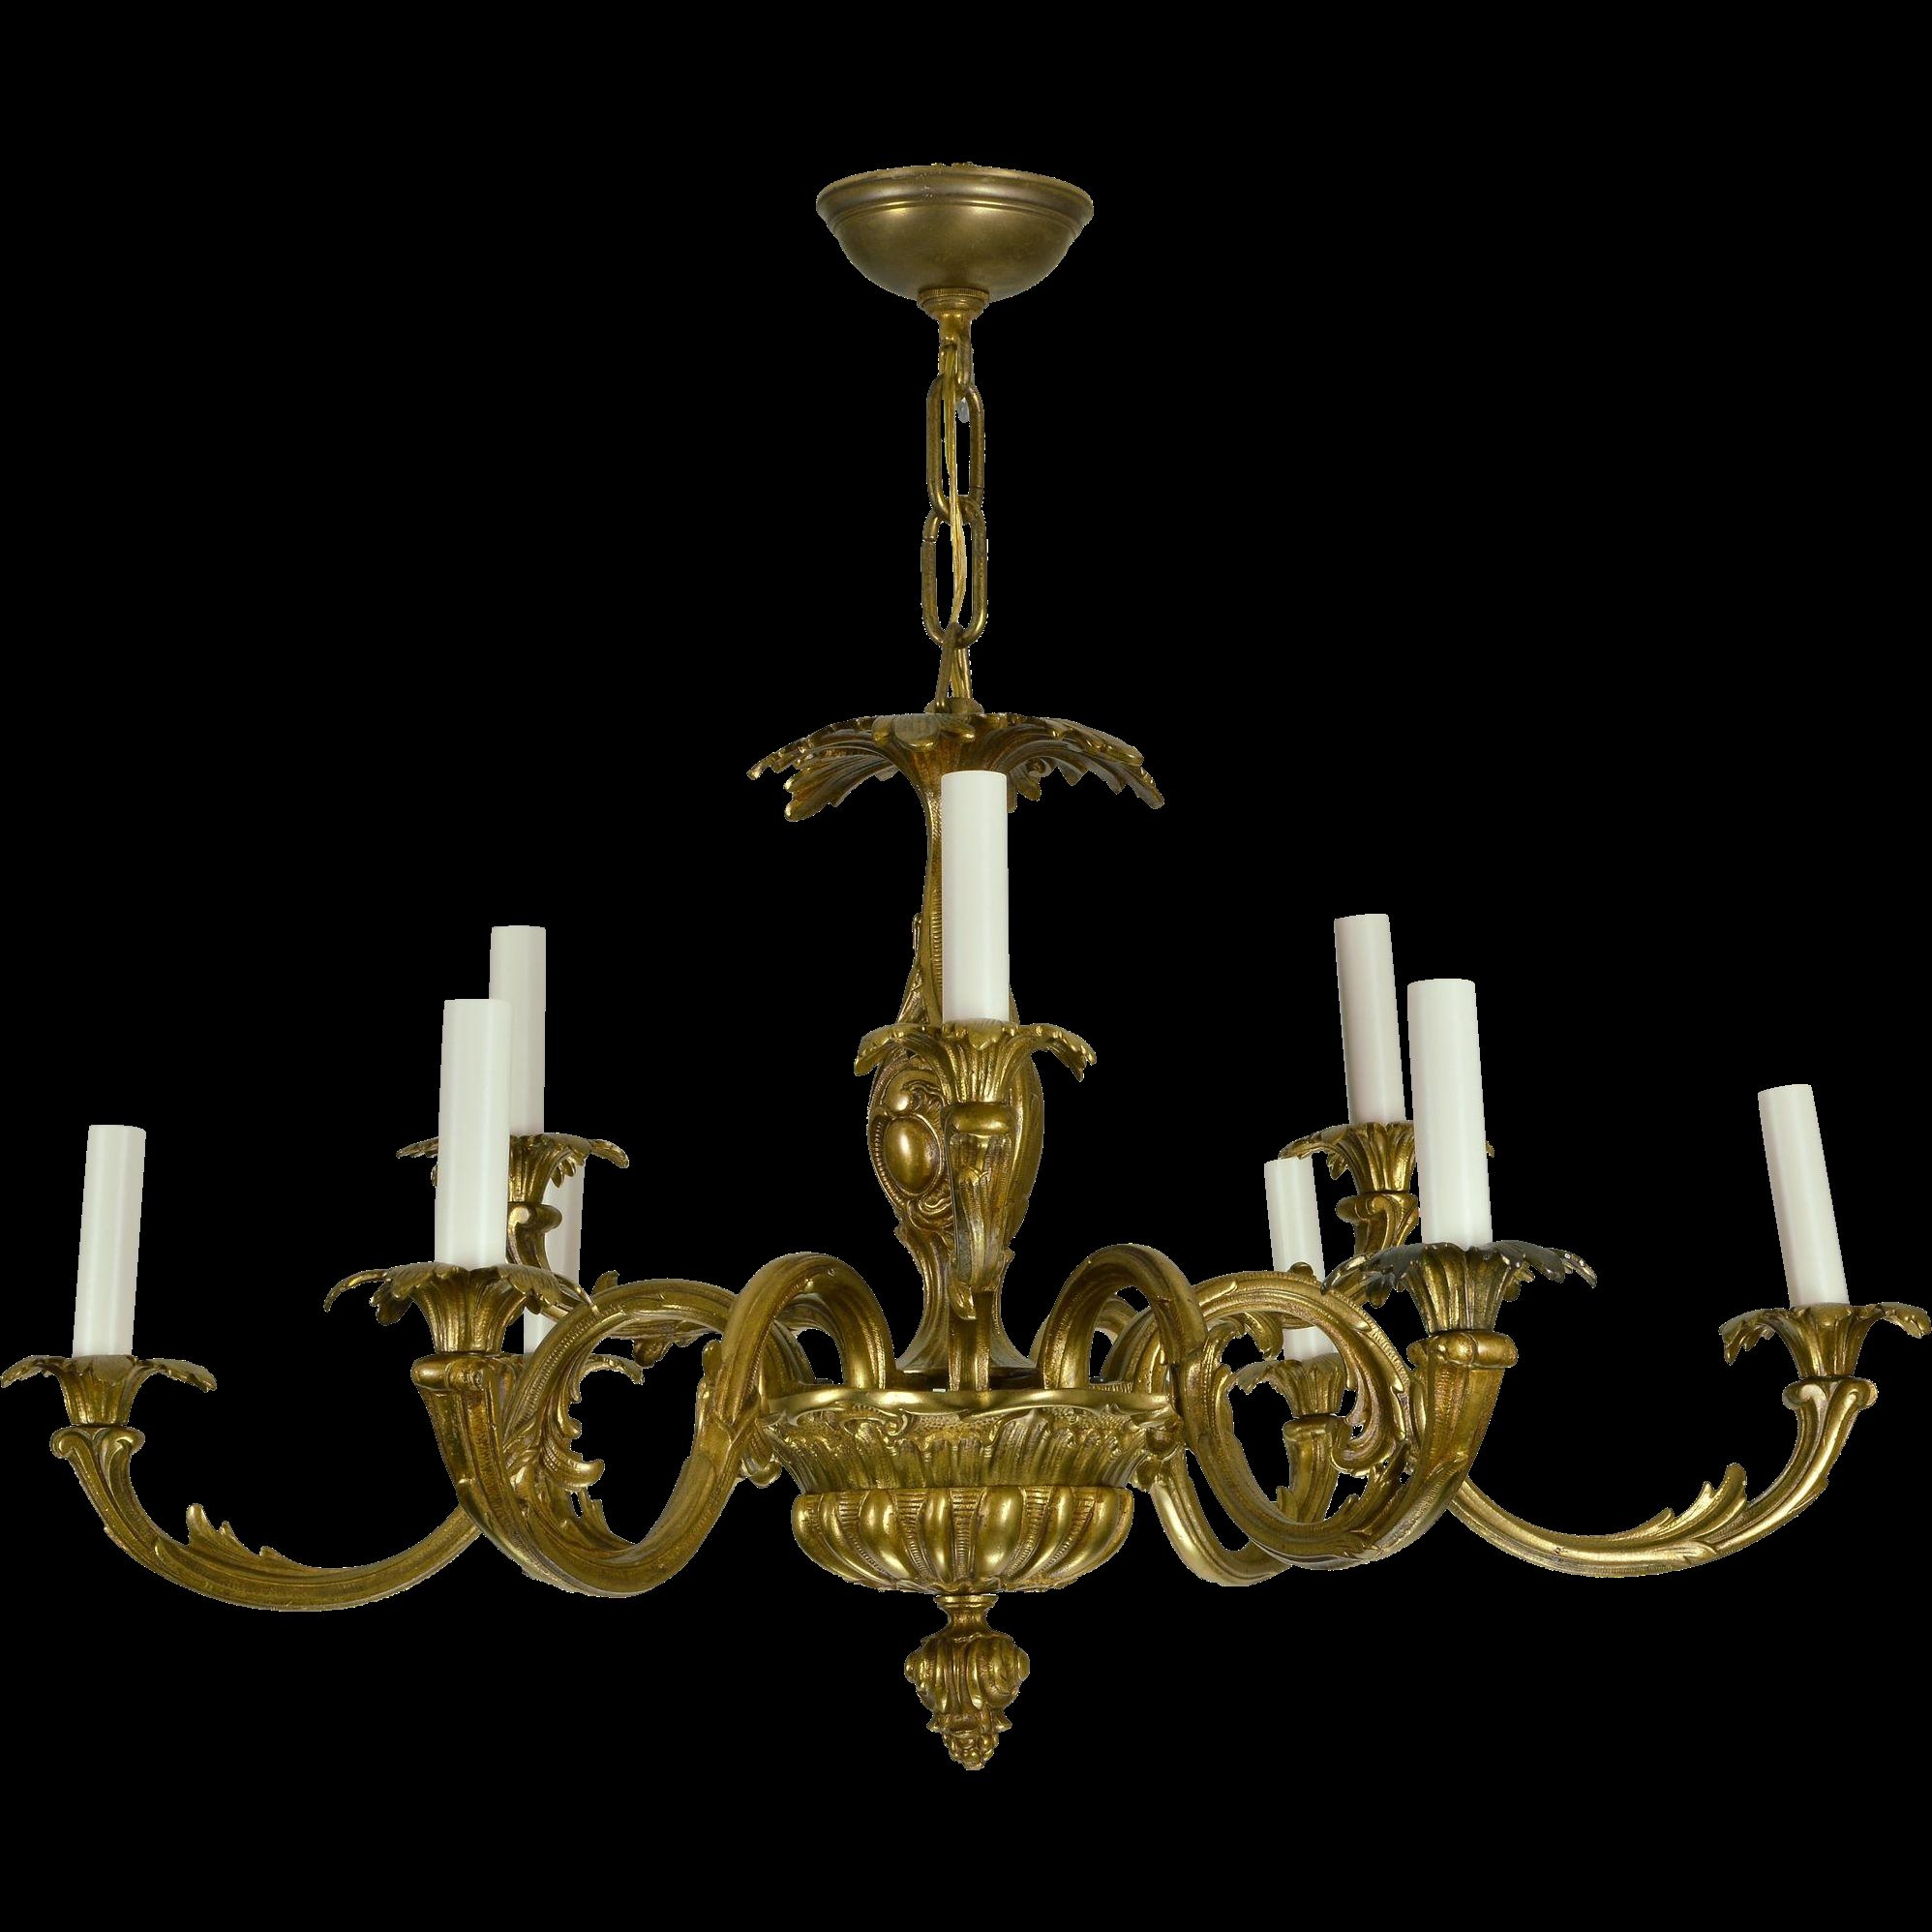 Vintage Brass French Baroque Chandelier From Tolw On Ru Lane Intended For Vintage Chandelier (Photo 7 of 12)